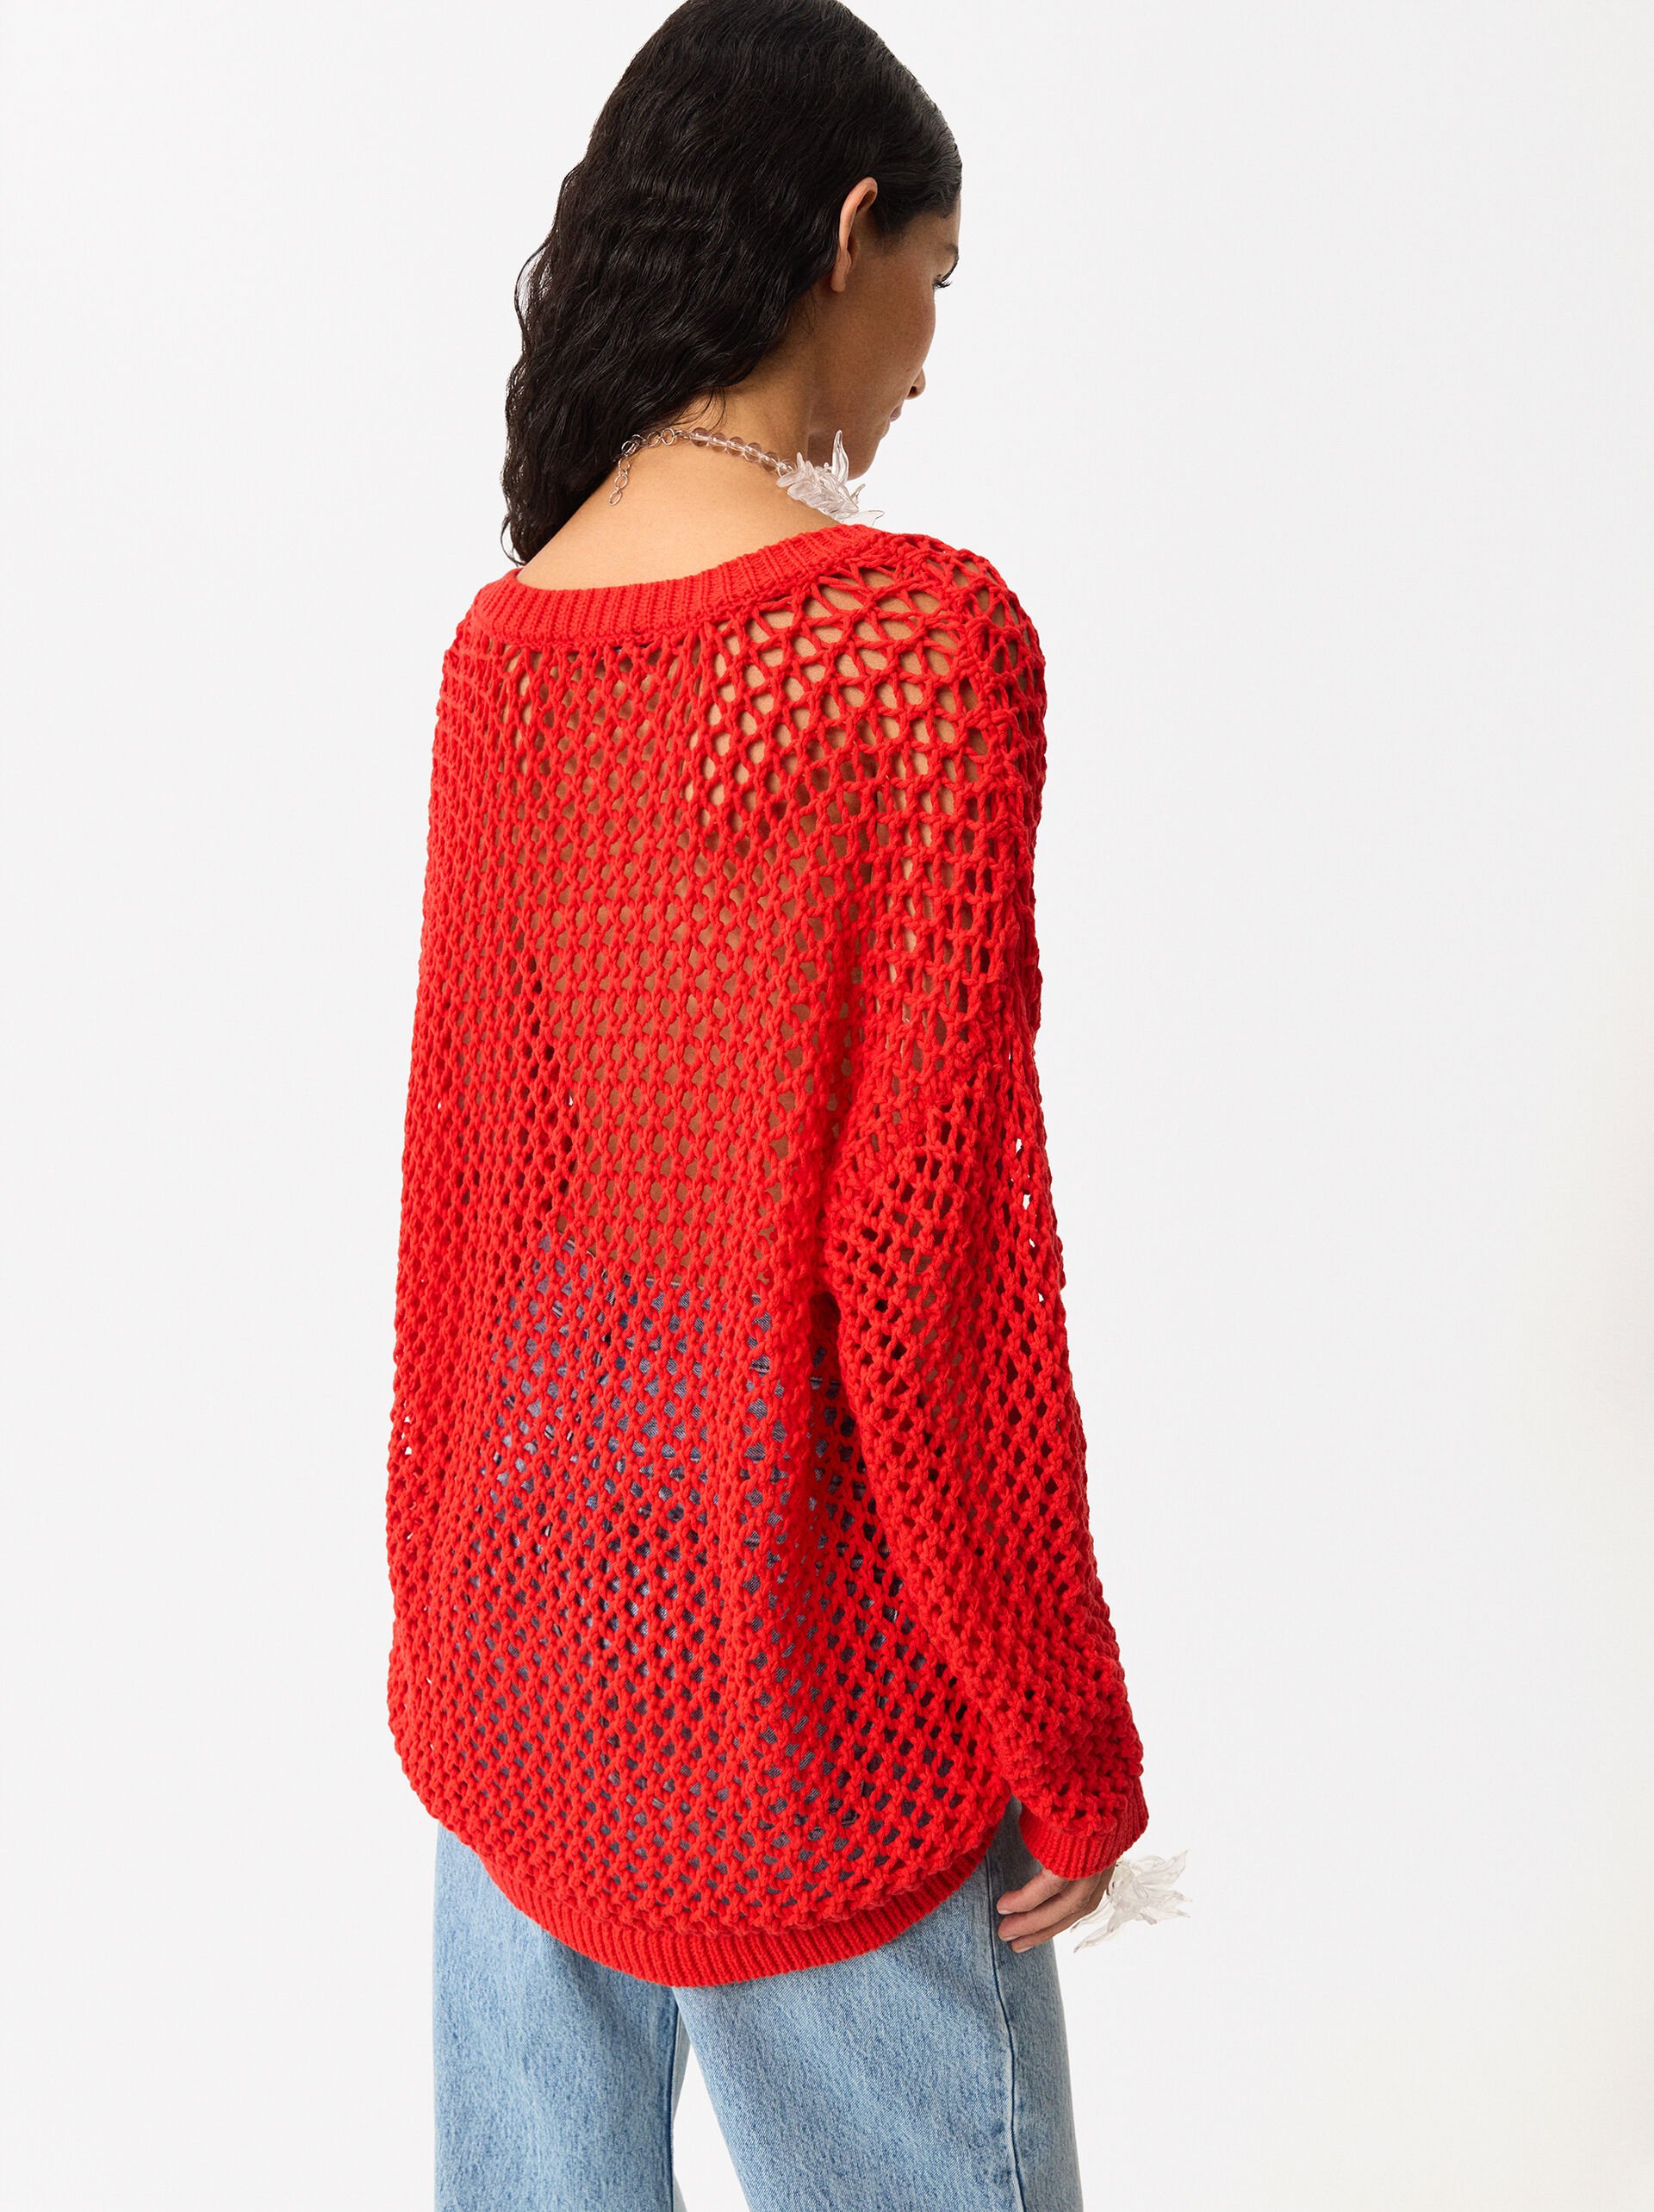 Open Knit Sweater With Cotton image number 4.0